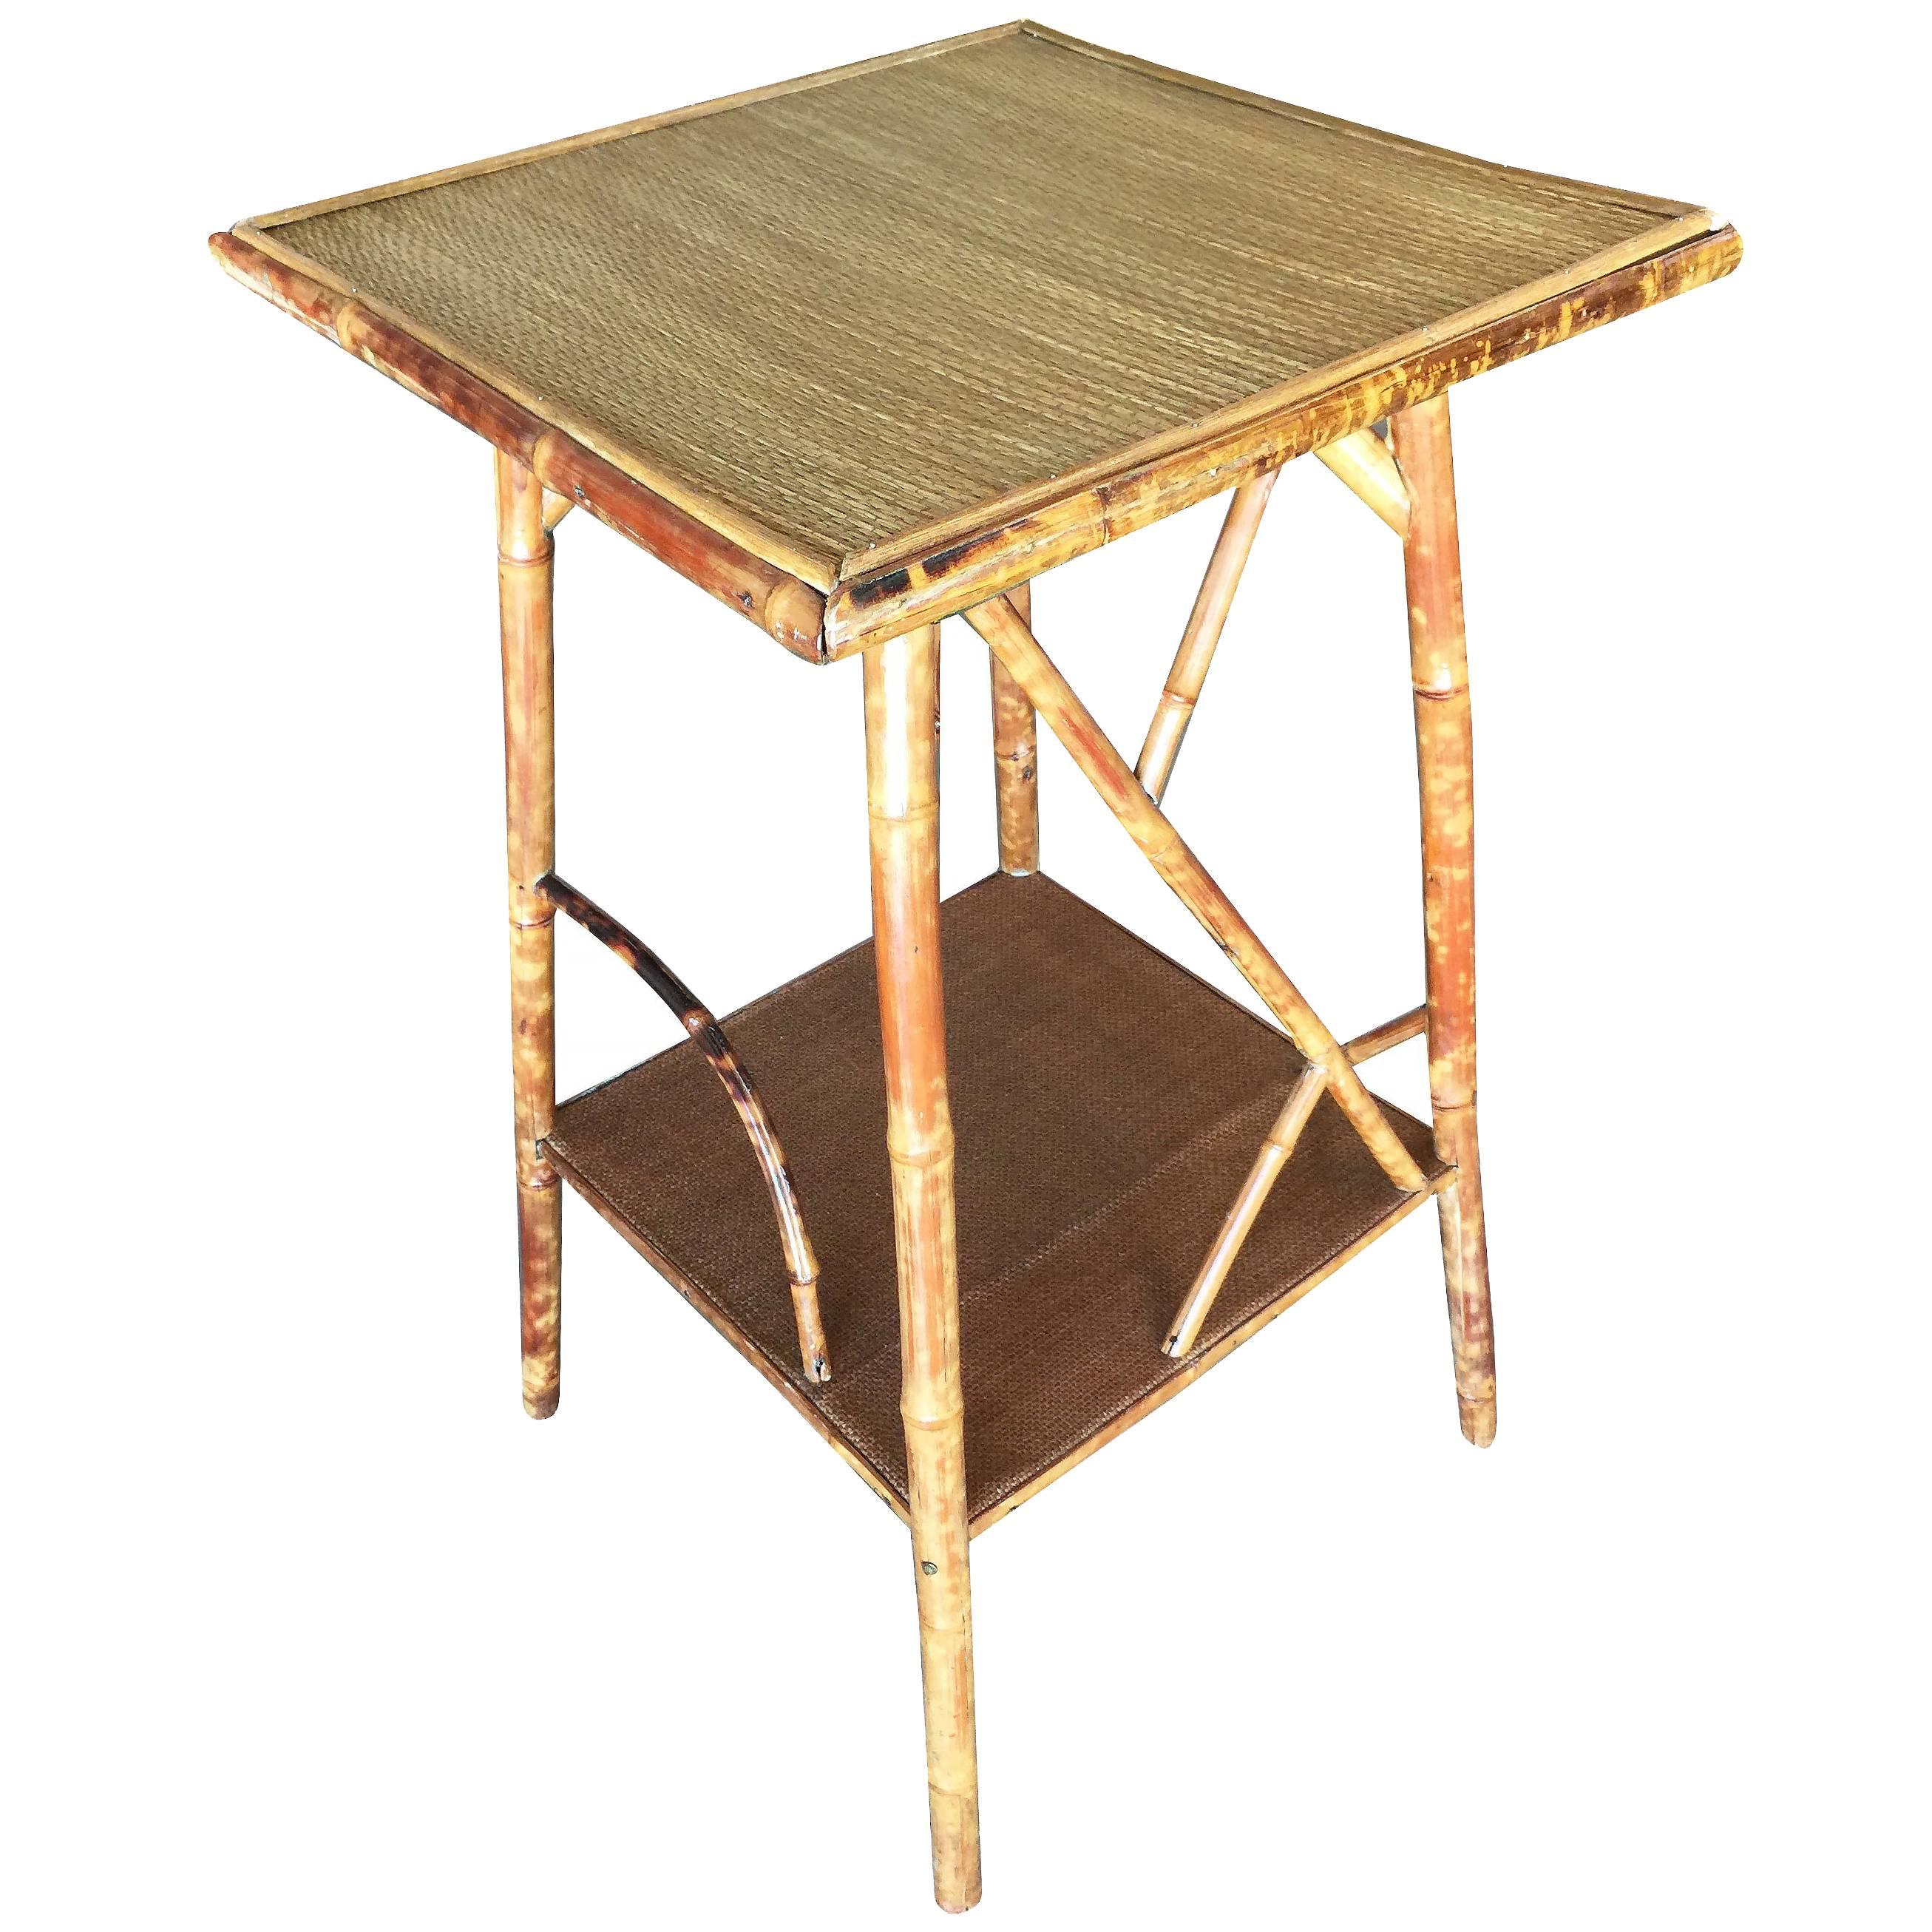 Restored Tiger Bamboo Pedestal Side Table with Organic Formed Accents